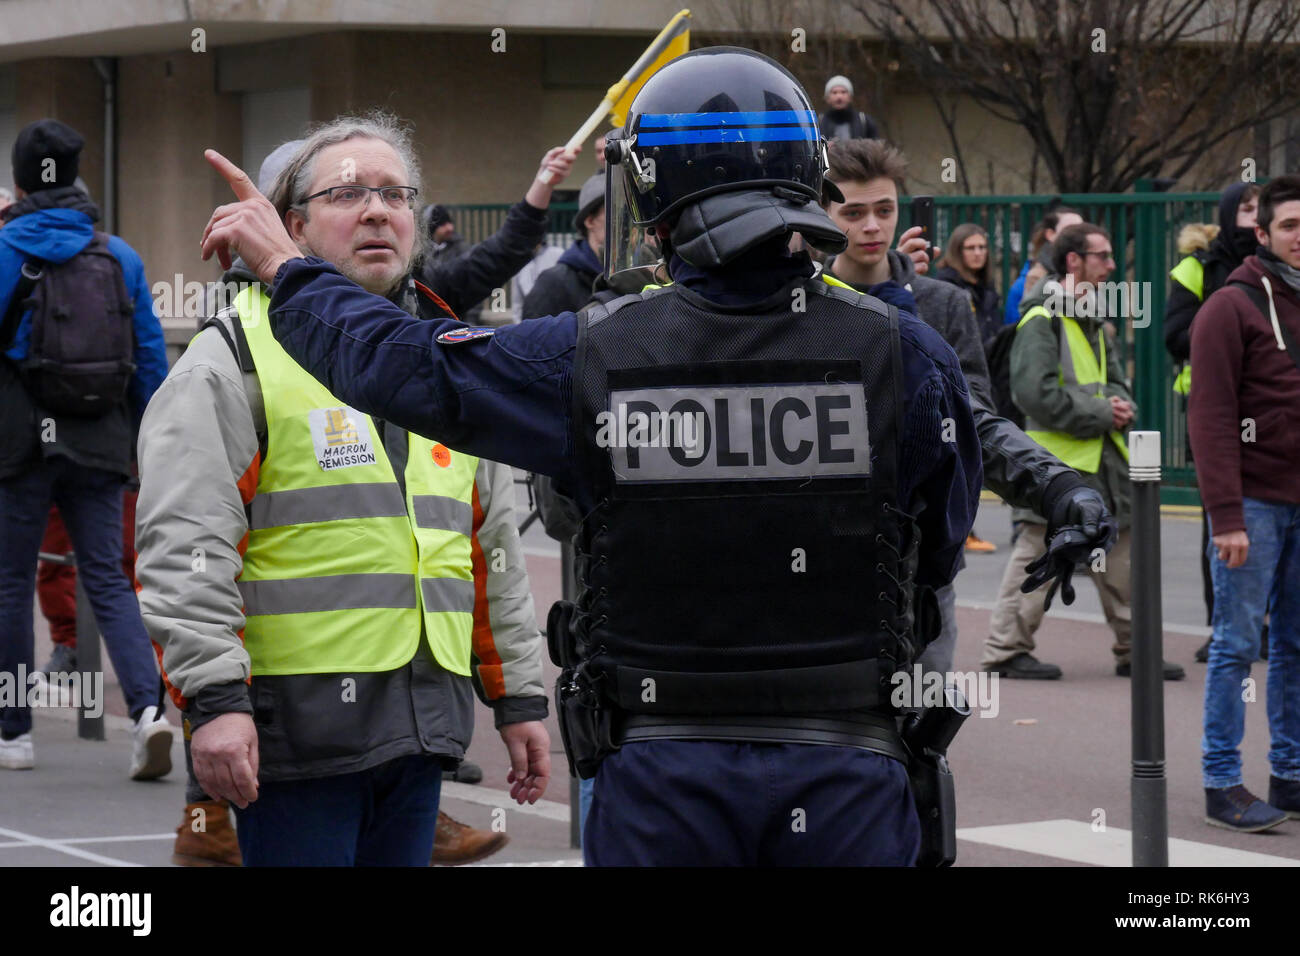 Lyon, France, February 9th 2019: 3500 Yellow Jackets marched in  Lyon (Central-Eastern France)  to protest Emmanuel Macron policy and ask for the impeachment of the French President.  Violent clashes with riot police forces and far right activist marked this 13th day of mobilization. Several  persons were injured and 21 were arrested, according with the Prefecture of Police. Credit Photo: Serge Mouraret/Alamy Live News Stock Photo